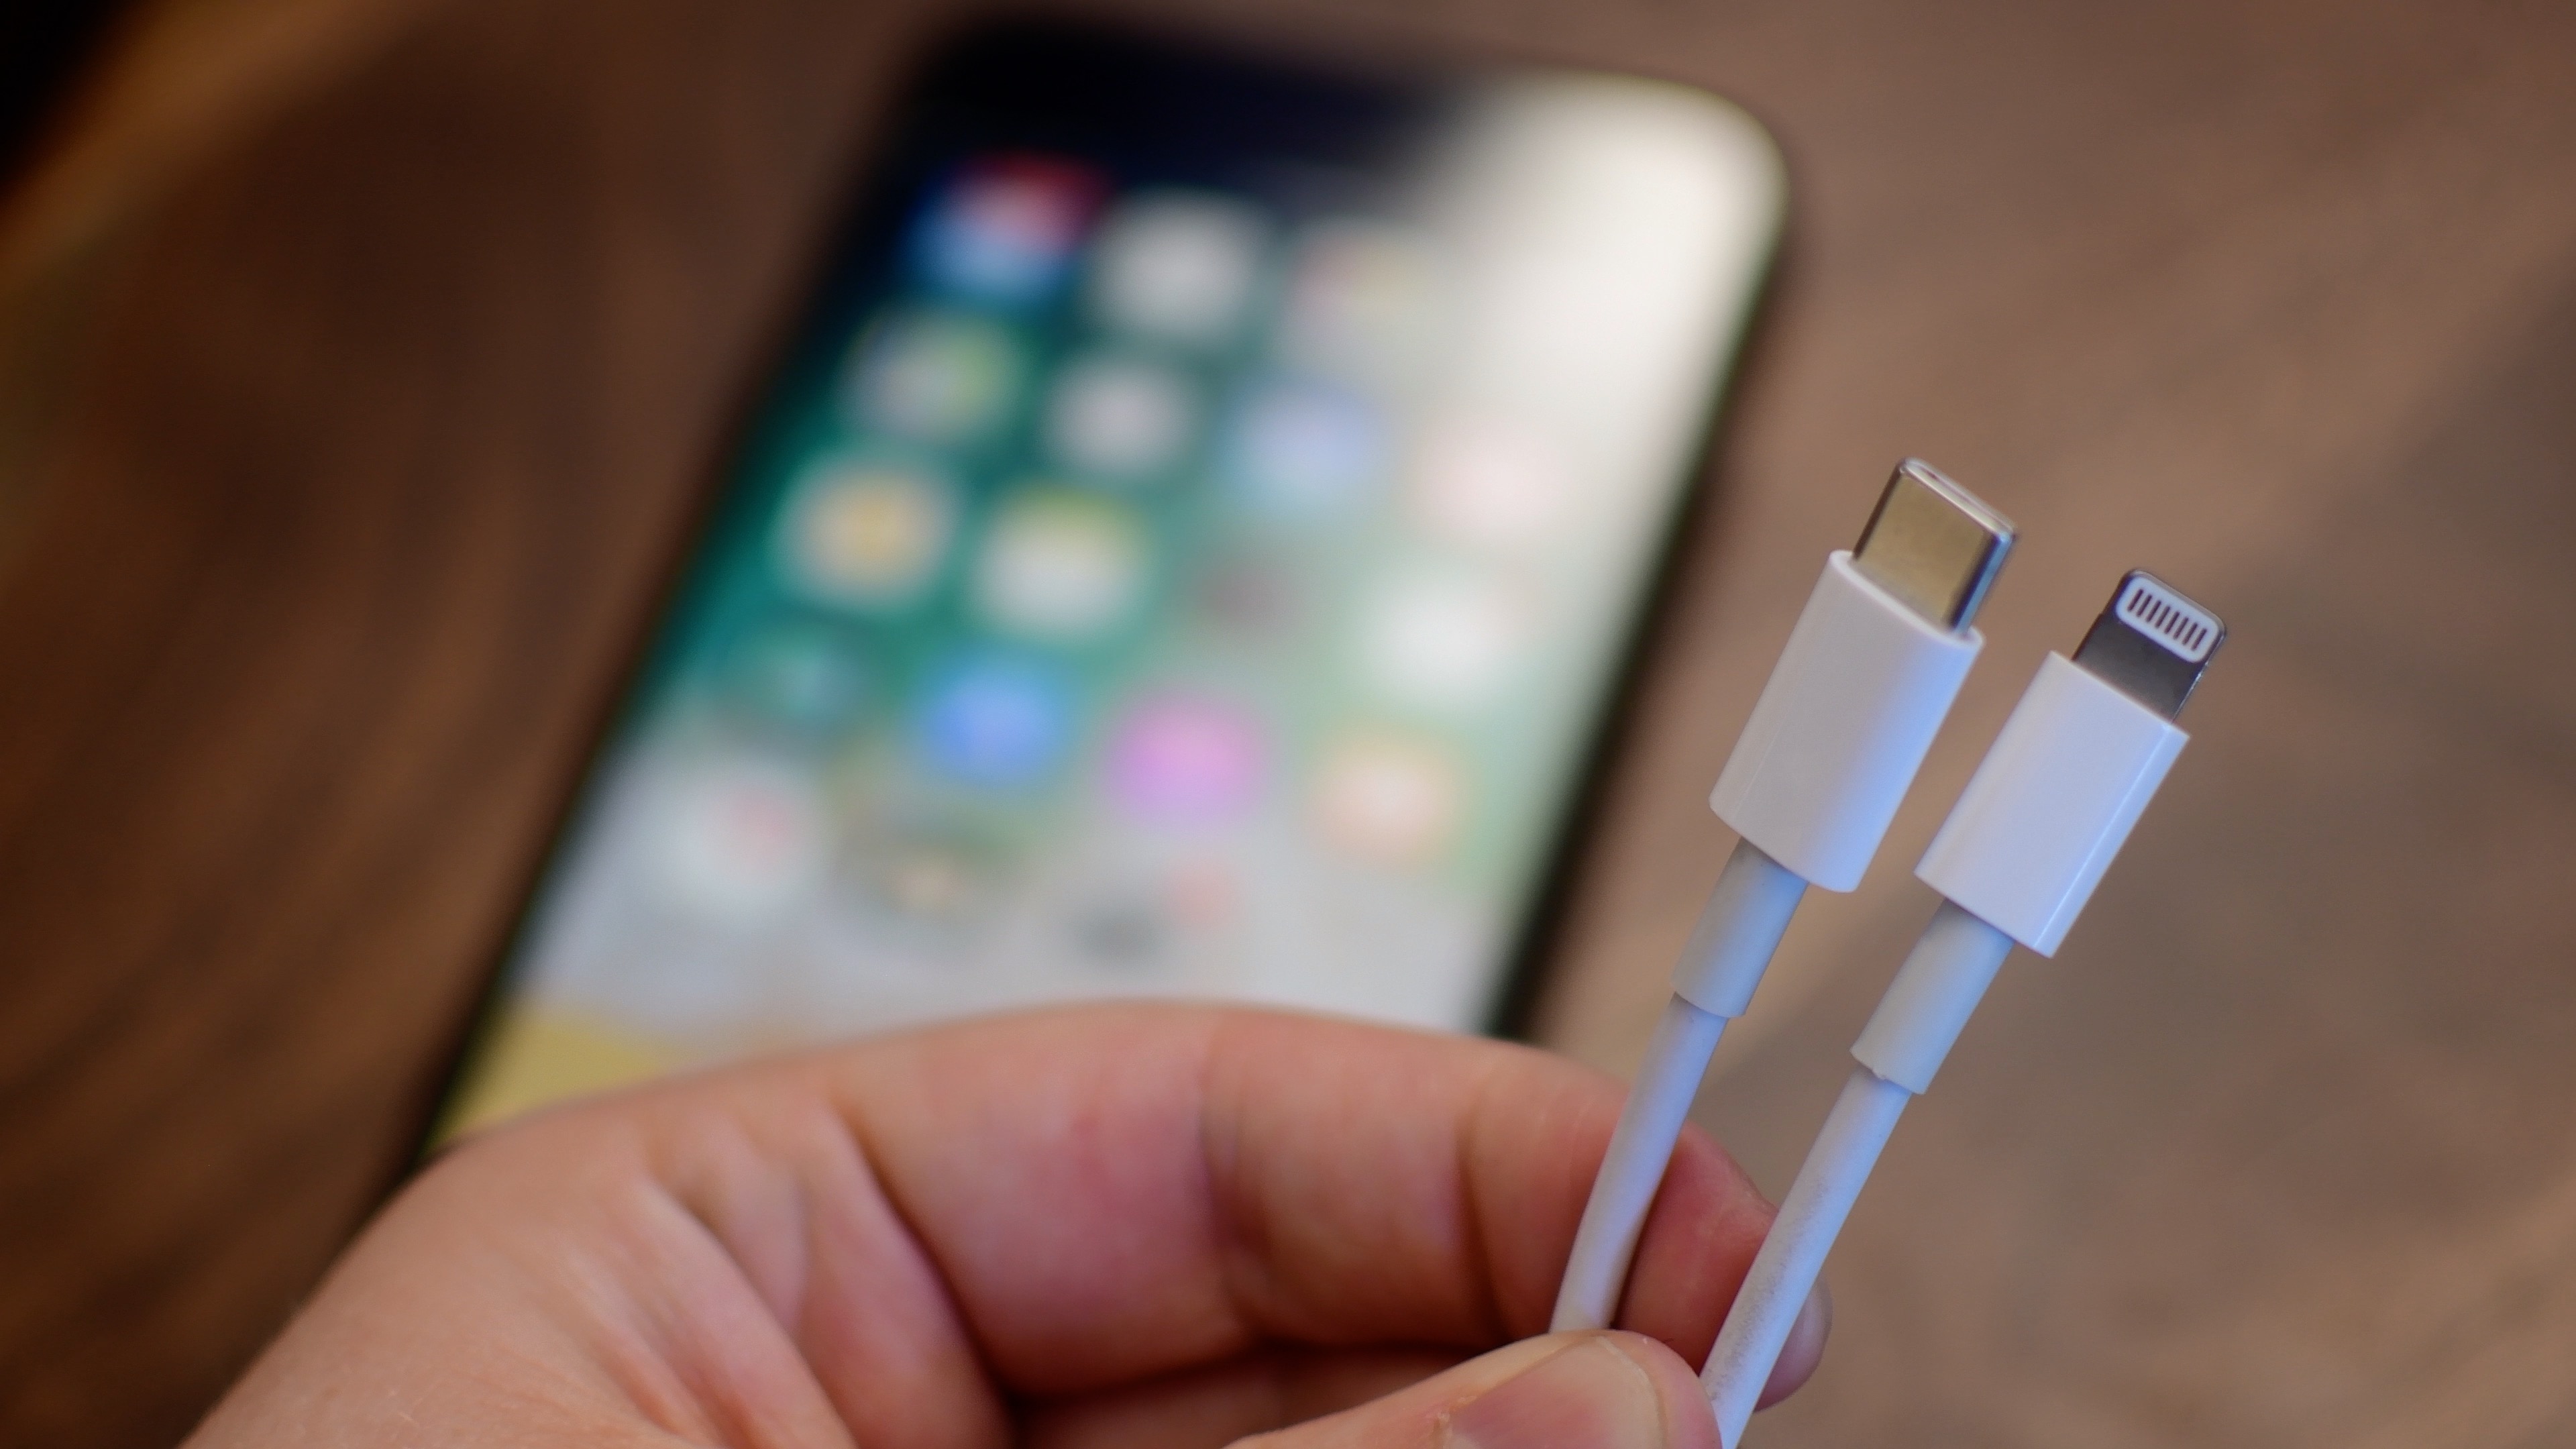 A photograph focused on Apple's Lightning to USB-C cable being held in front of the camera, with an iPhone laid on a table blurred out in the background